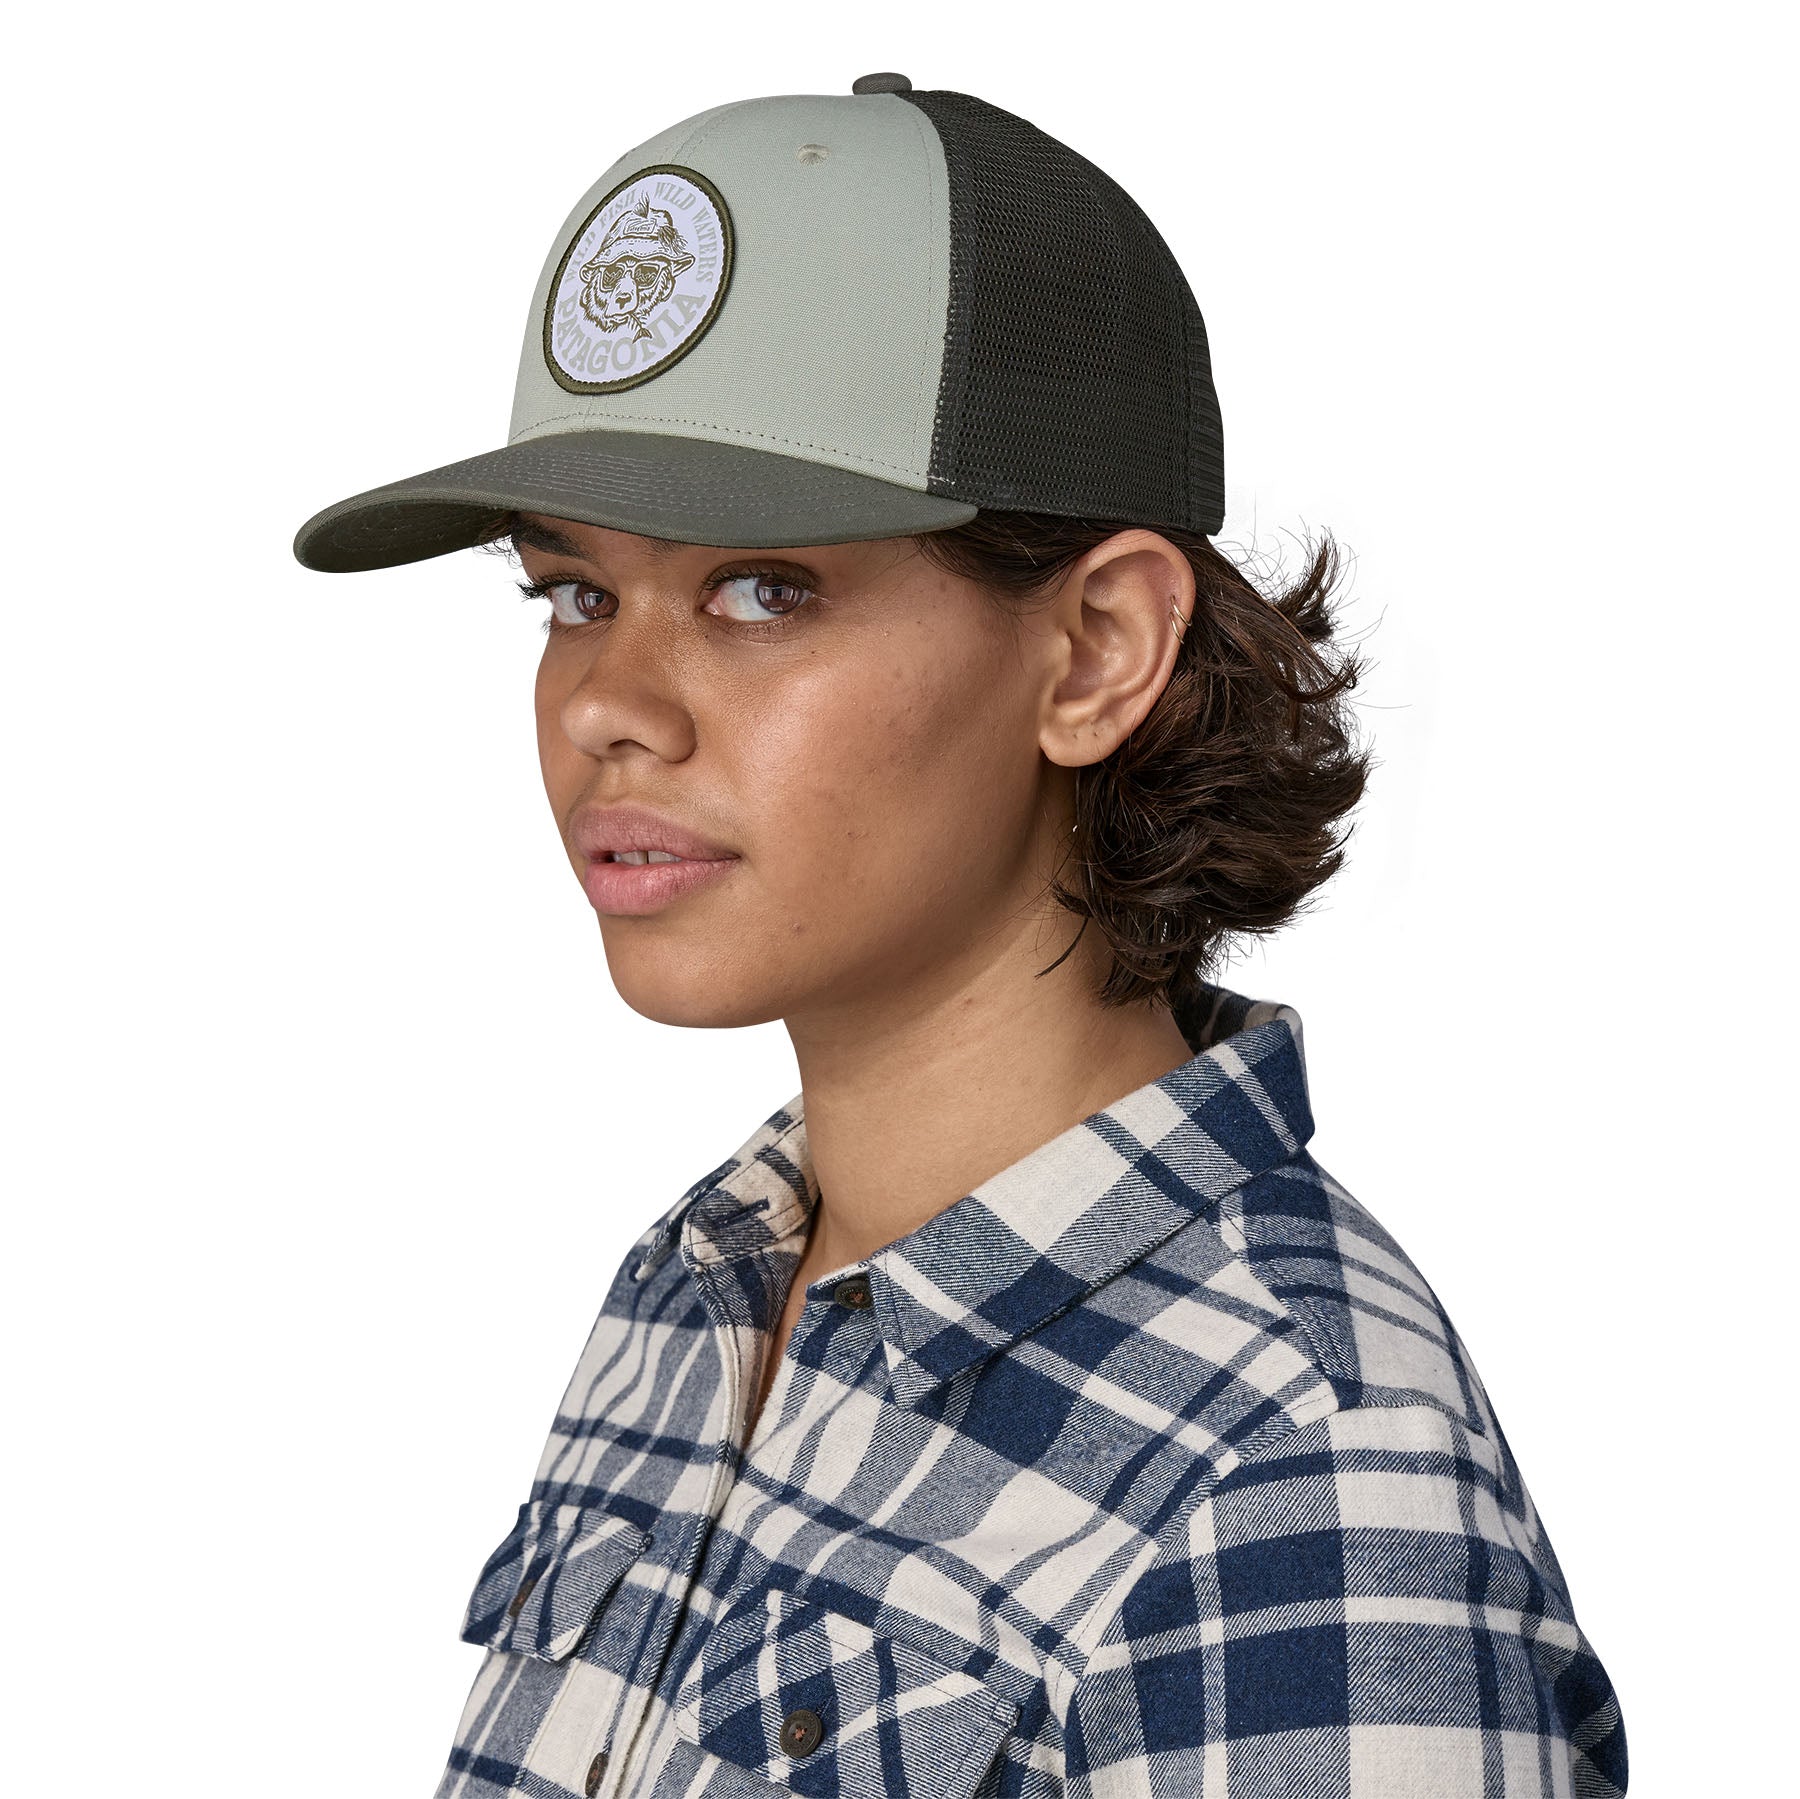 Patagonia Take a Stand Trucker Hat Wild Grizzly Sleet Green